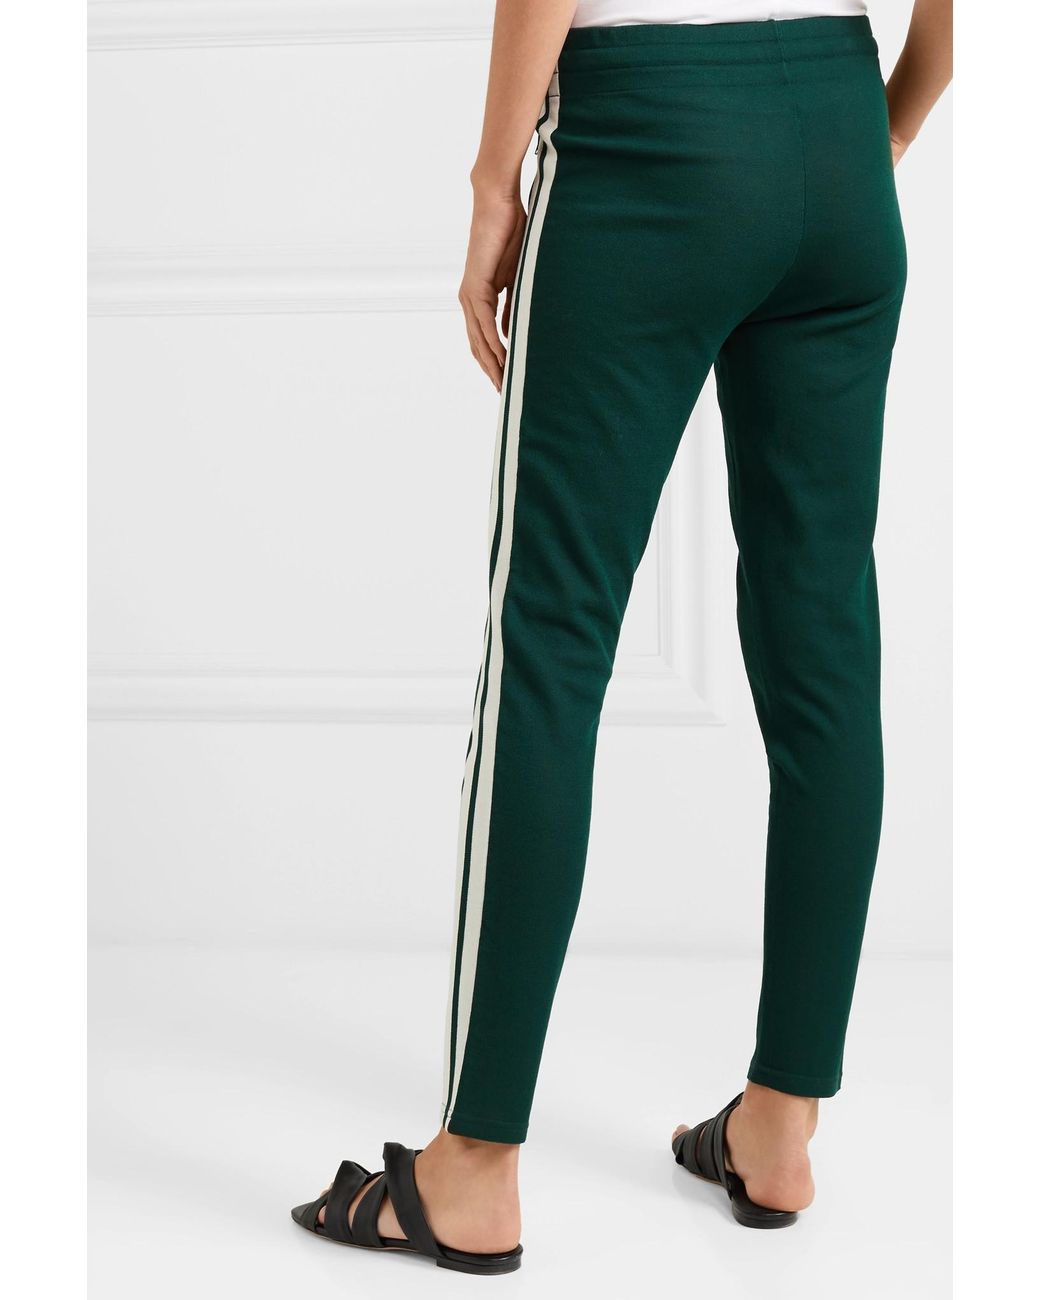 Étoile Isabel Marant Dario Striped Jersey Track Pants in Forest Green  (Green) | Lyst